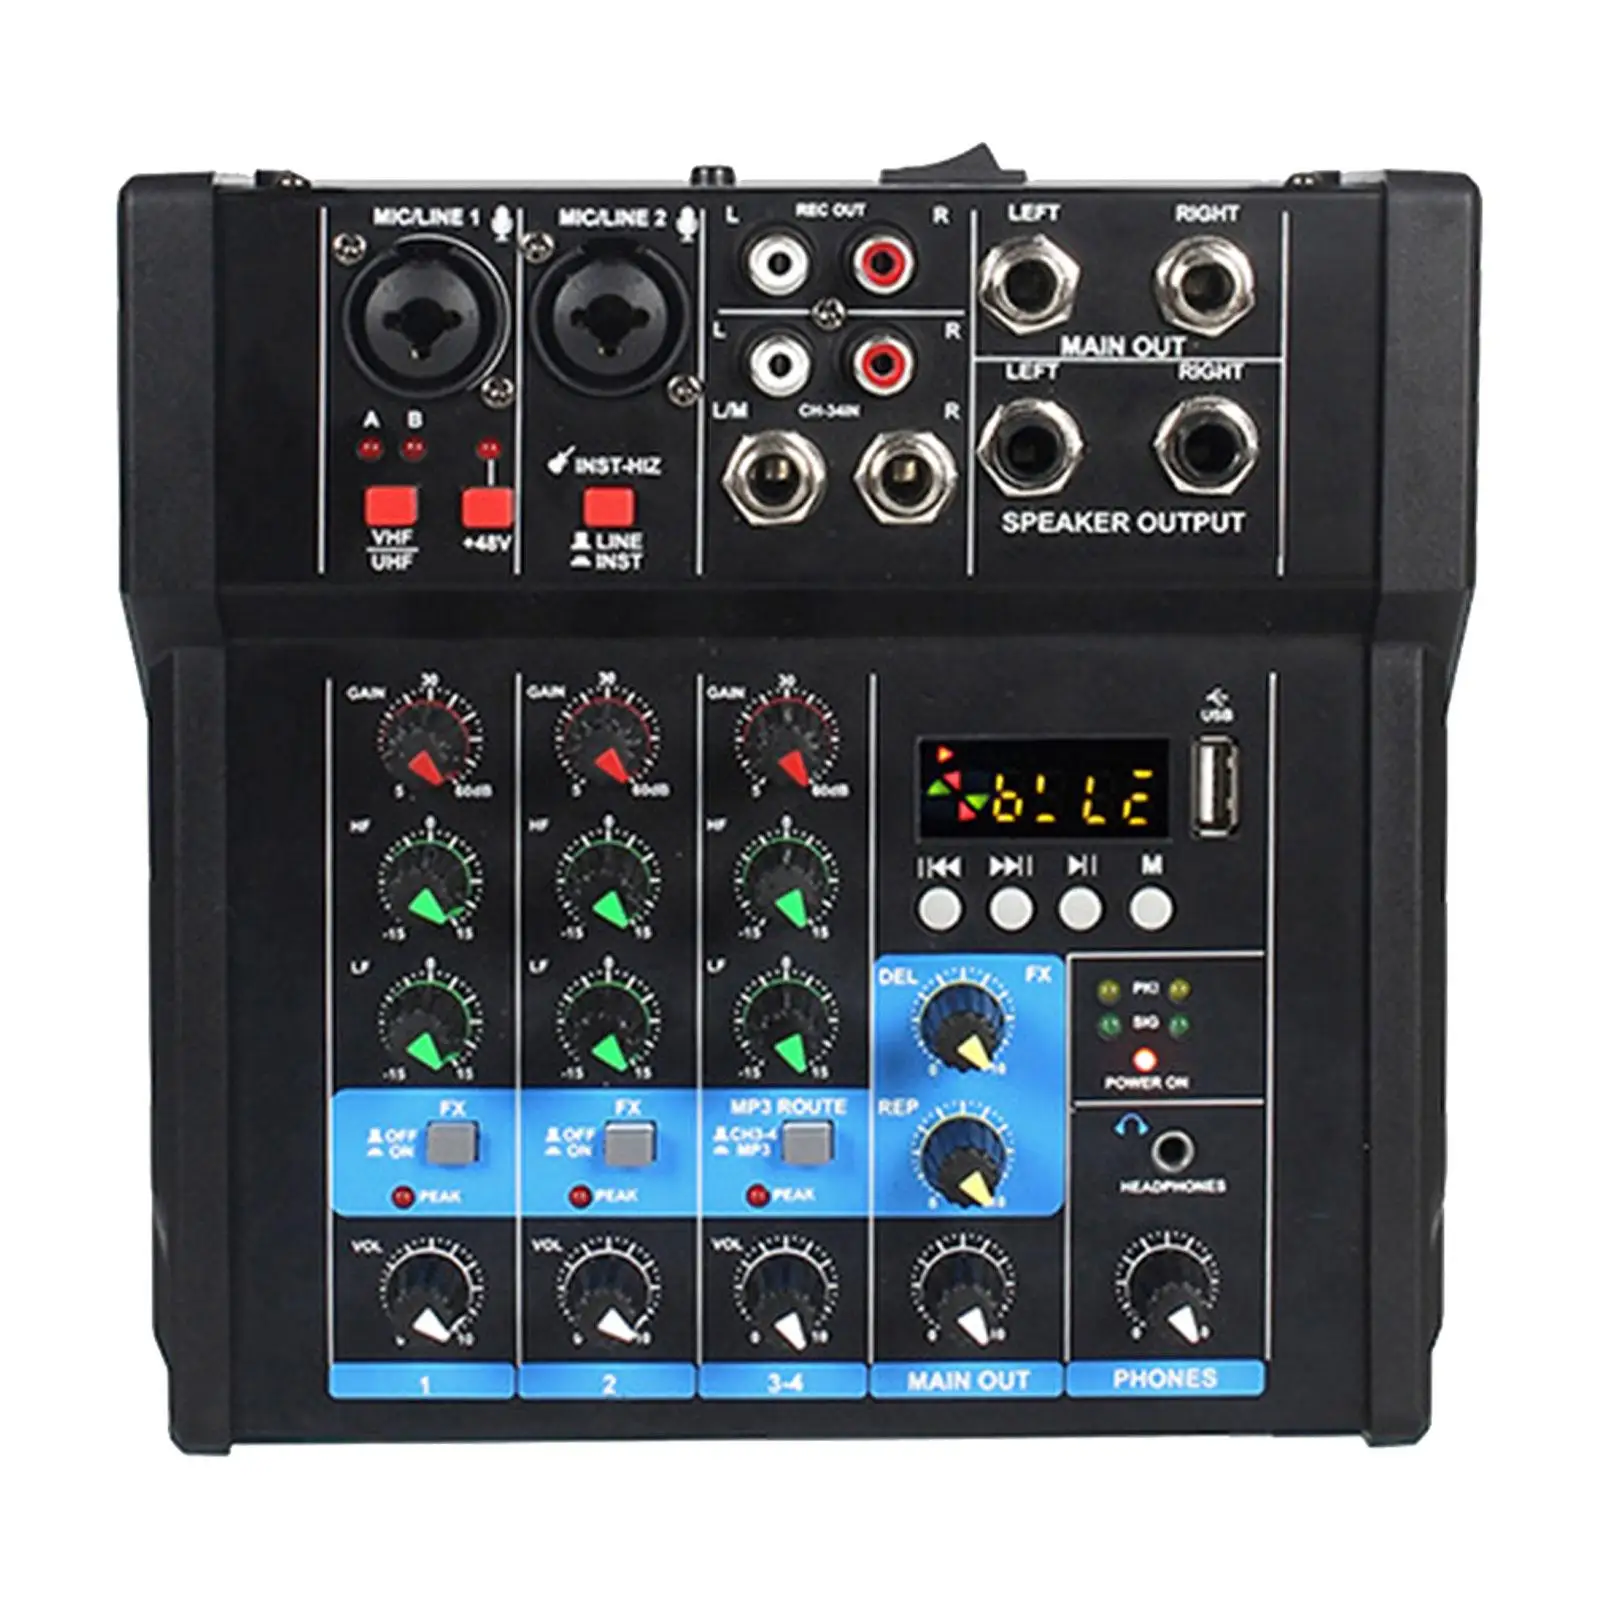 Audio Mixer 4 Channel Portable MP3 Bluetooth USB Interface Professional DJ Mixer for Studio Recording Party DJ Mixing Home